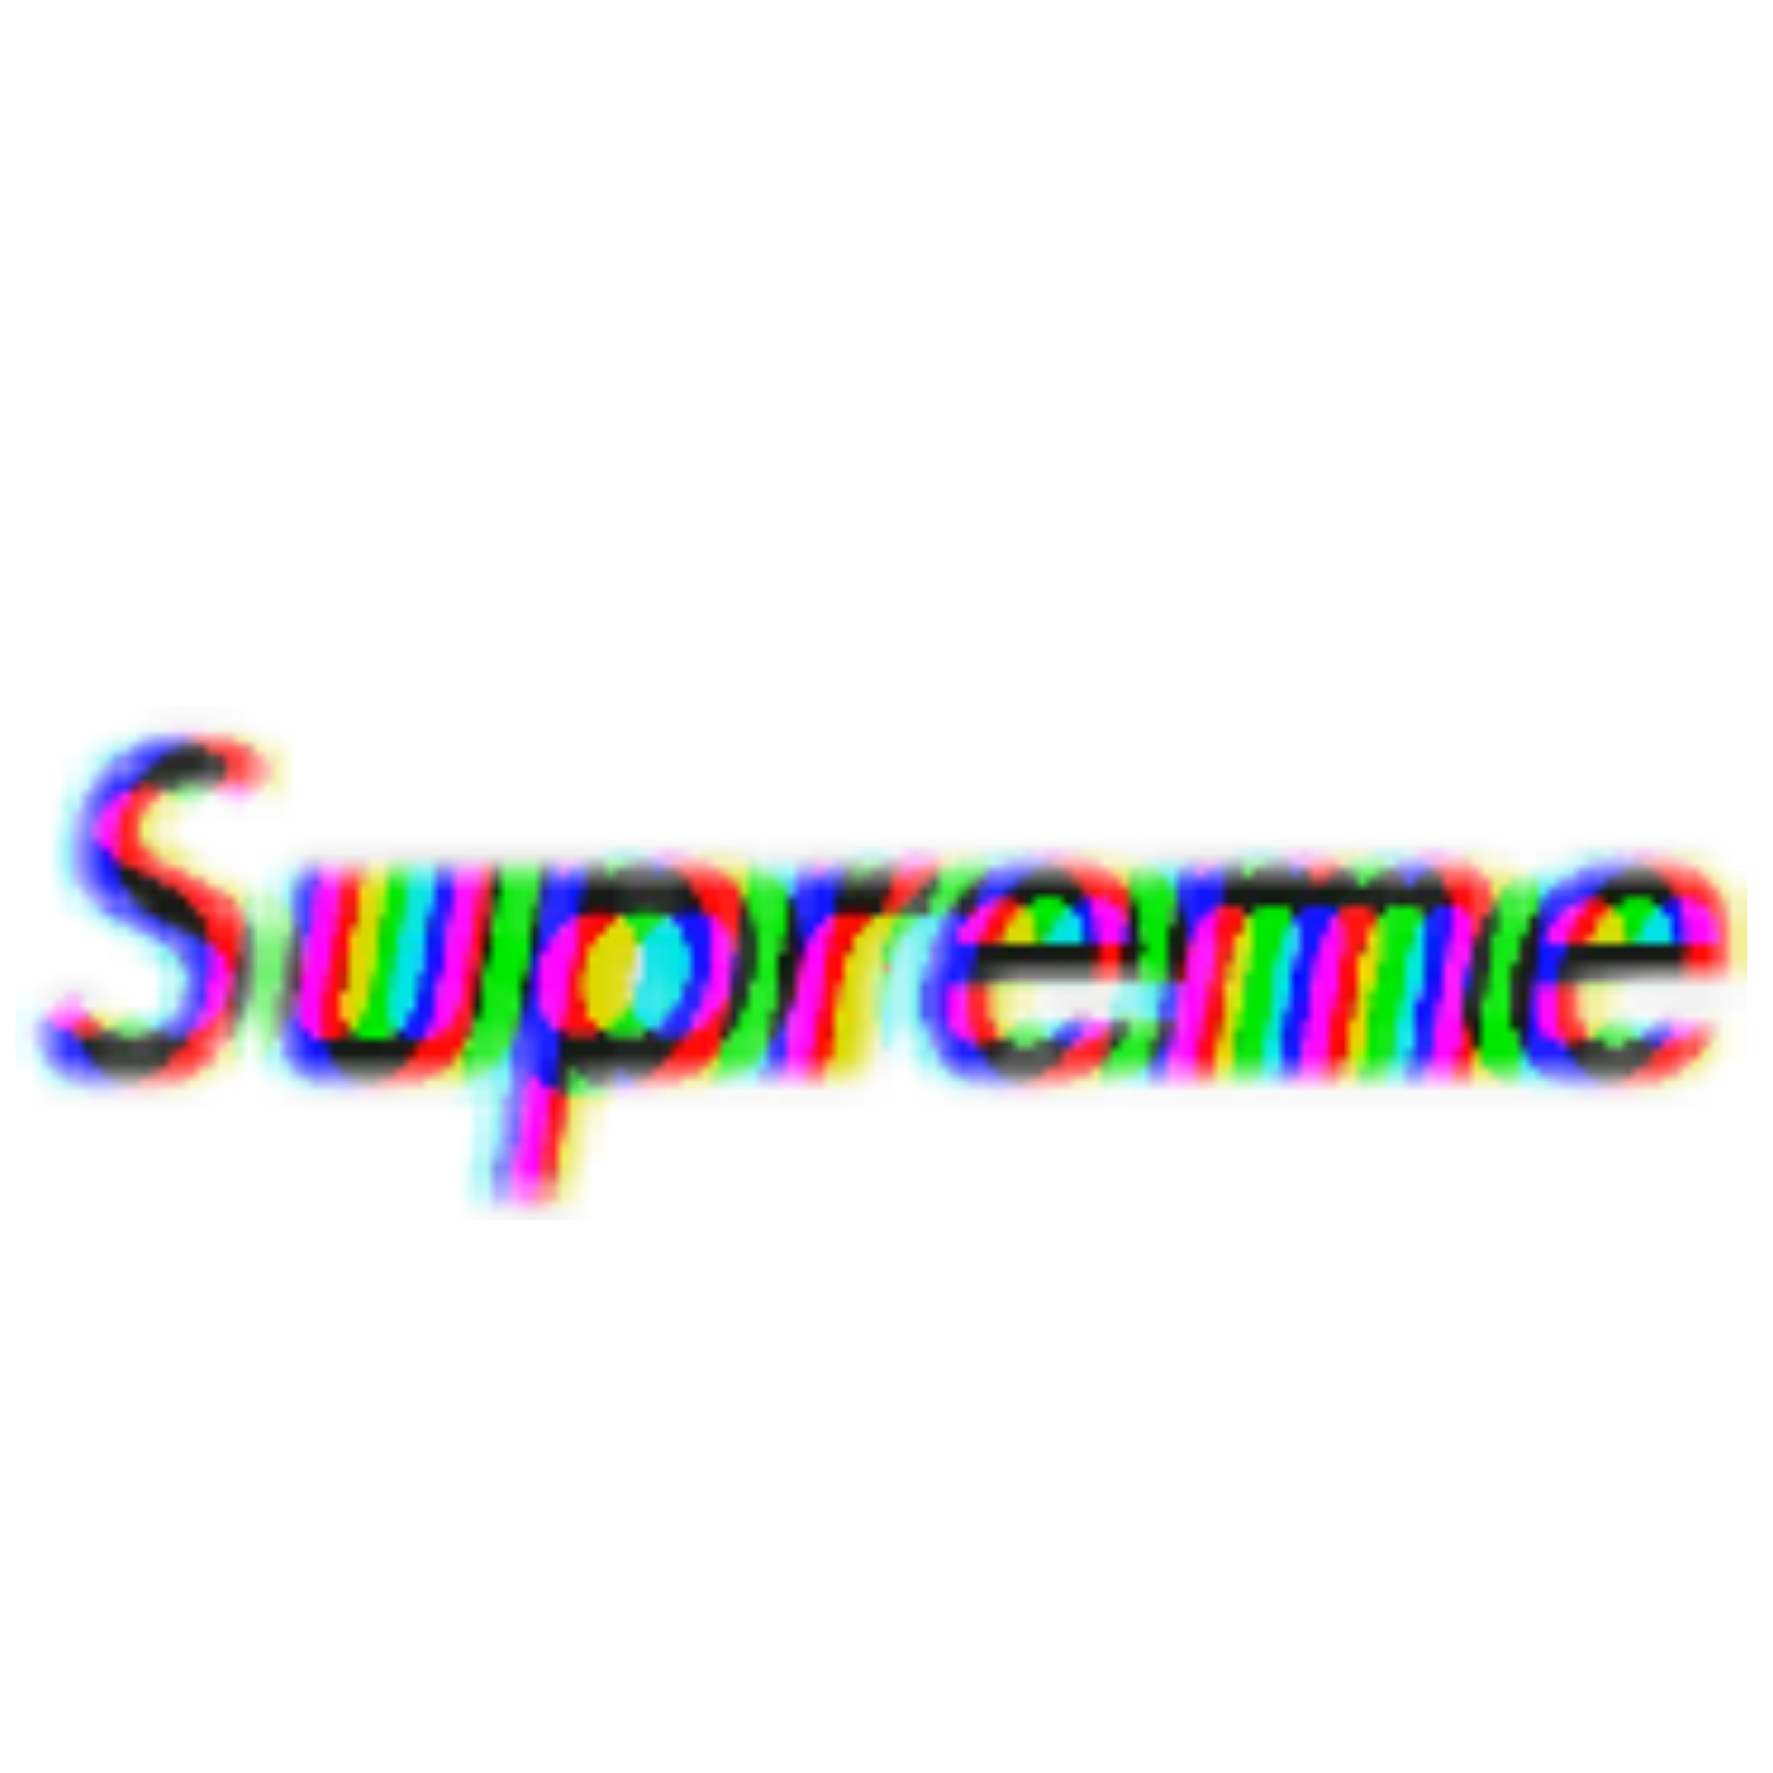 Transparent Supreme Logo Png Images Free Downloads Free Transparent Png Logos - asthetic transparent background roblox shirt template 2020